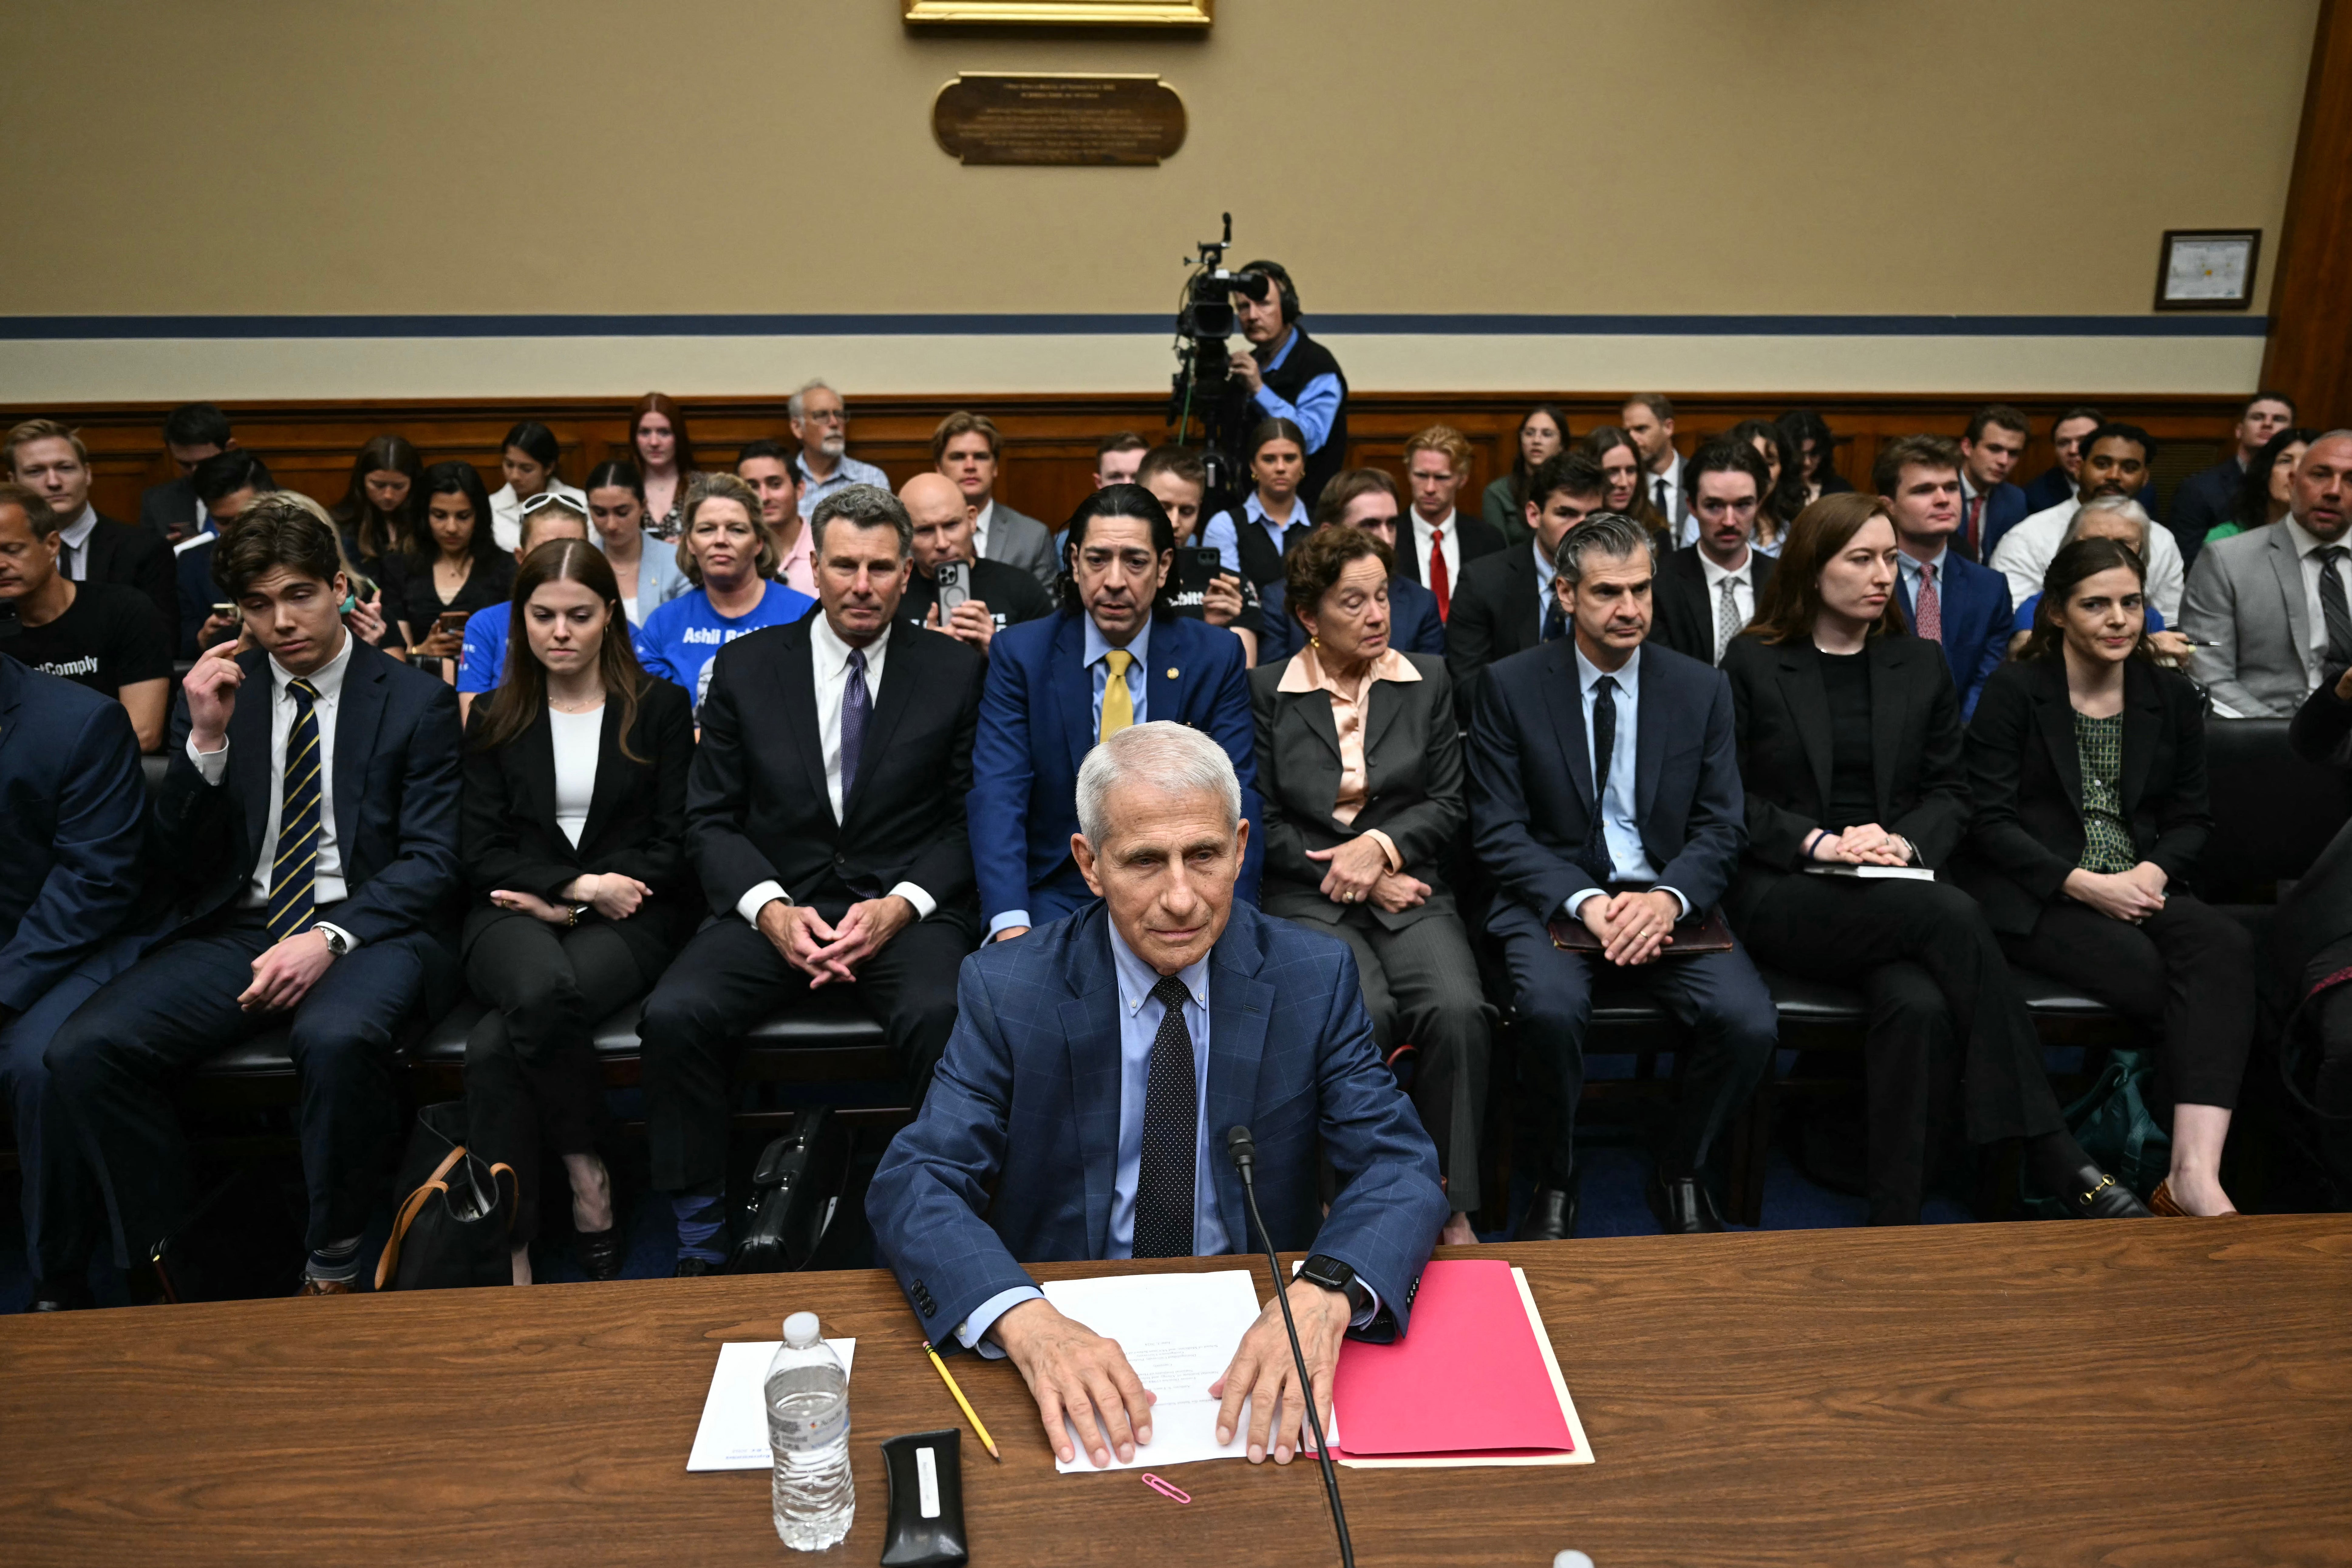 Anthony Fauci takes his seat ahead of a bruising House hearing about Covid on Monday